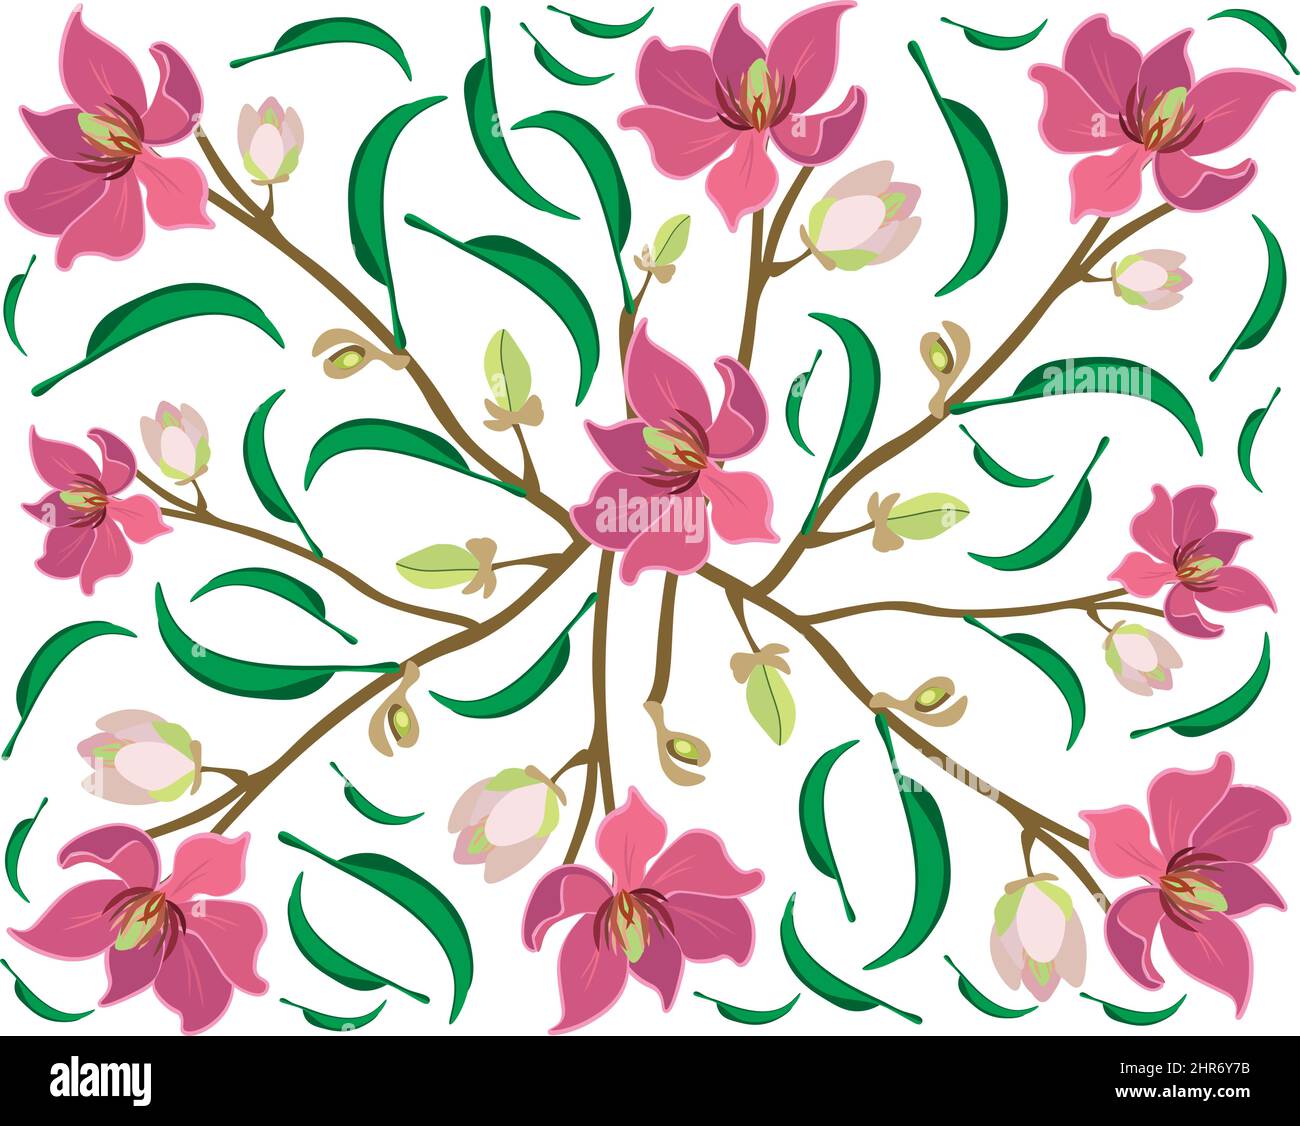 Beautiful Flower, Illustration Background of Wine Magnolia Flower or Magnolia Figo Flowers with Green Leaves on A Branch. Stock Vector